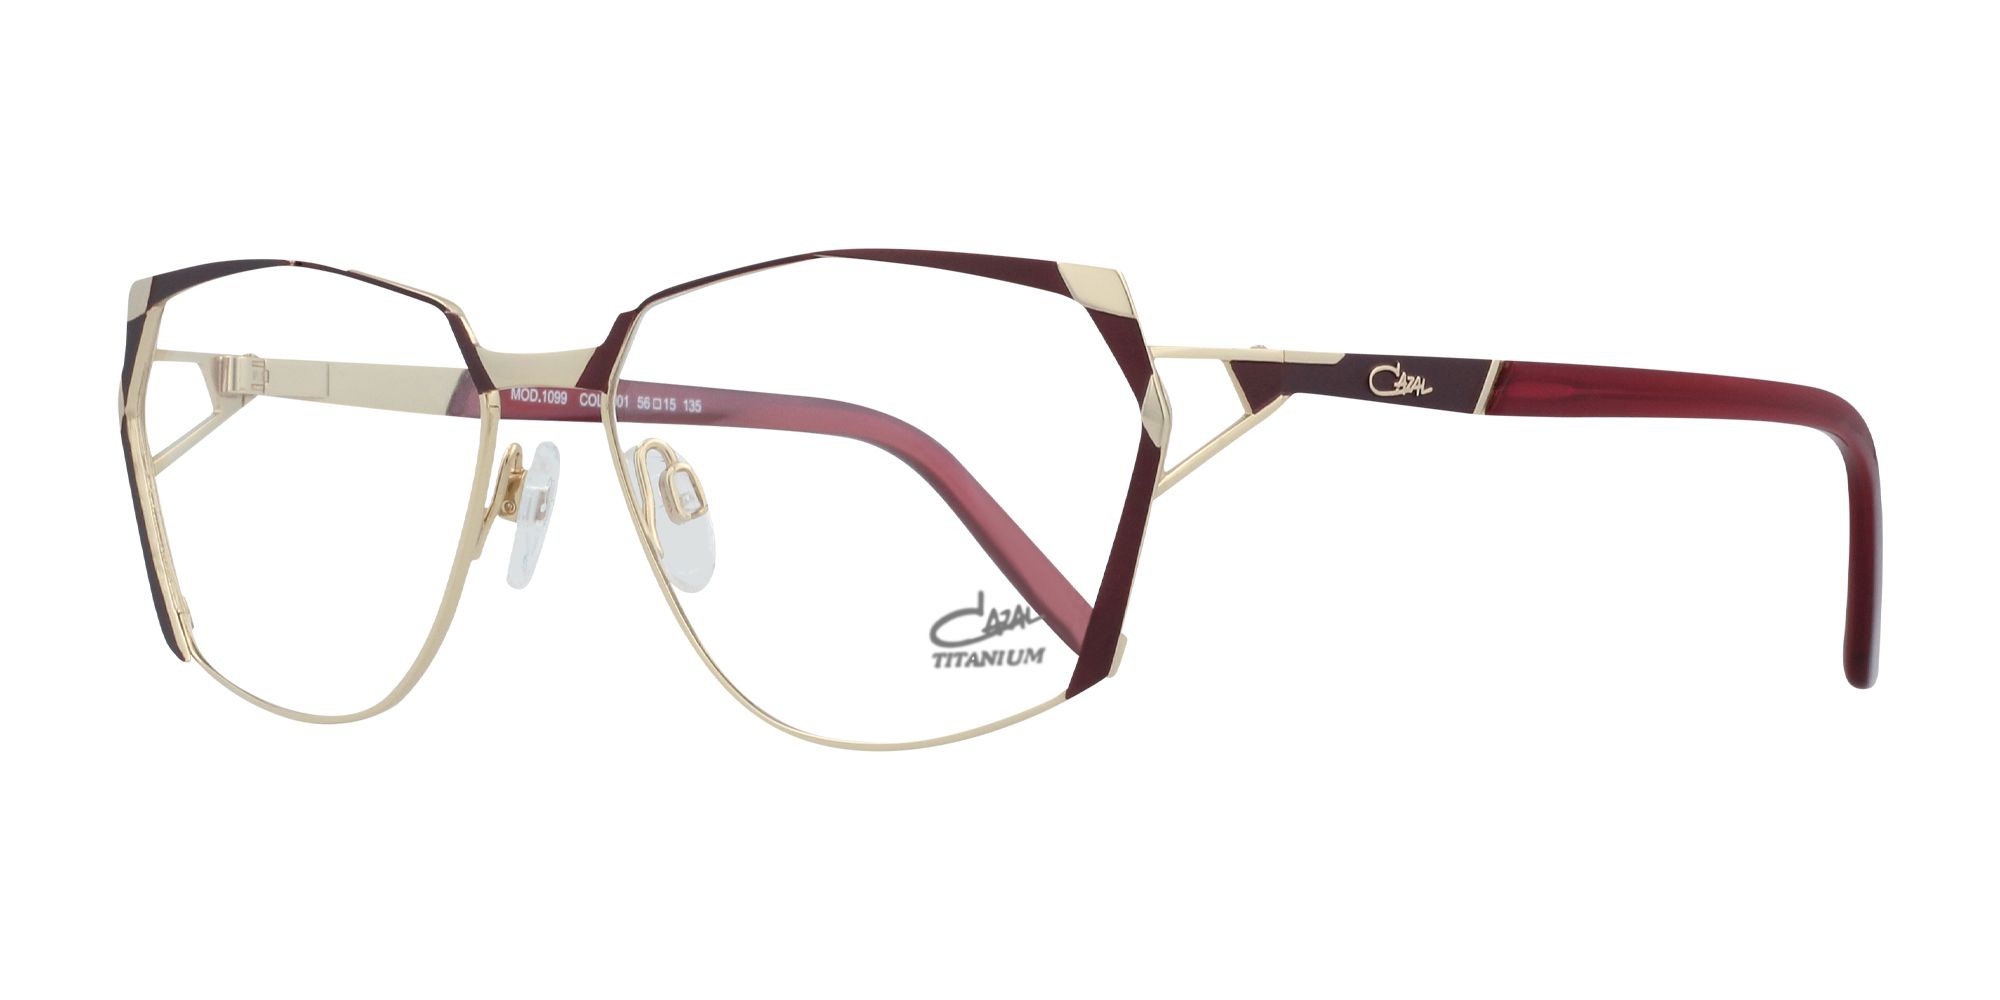 Buy in Titanium Glasses, Exclusive Boutique Brands, Boutique Brands - 50% Off, CAZAL, CAZAL at GG by the bay, Glasses Gallery CA. Available variables: